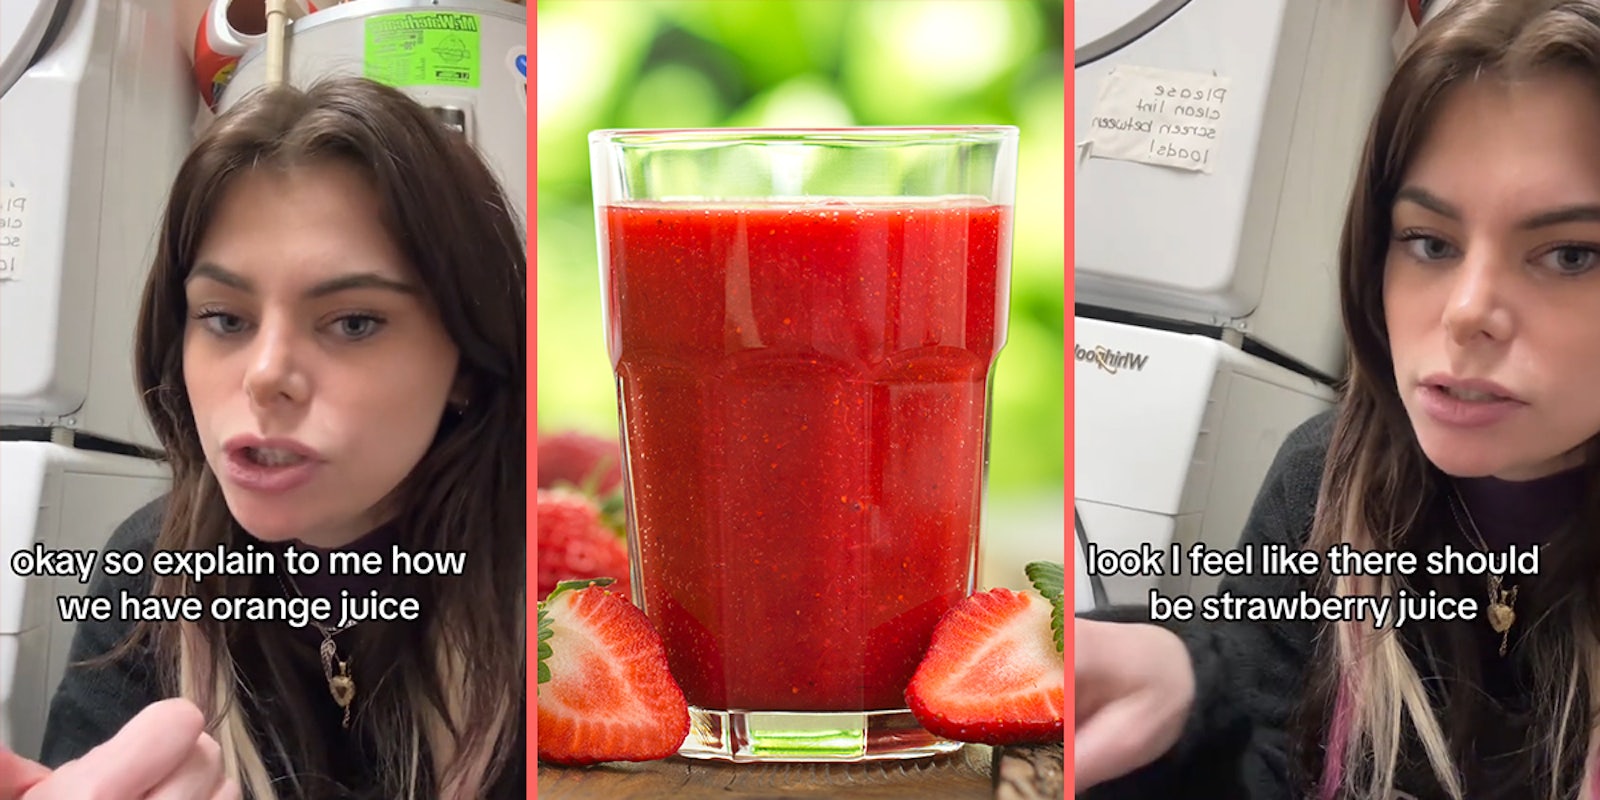 woman speaking with caption 'okay so explain to me how we have orange juice' (l) strawberry juice in glass (c) woman speaking with caption 'look I feel like there should be strawberry juice' (r)